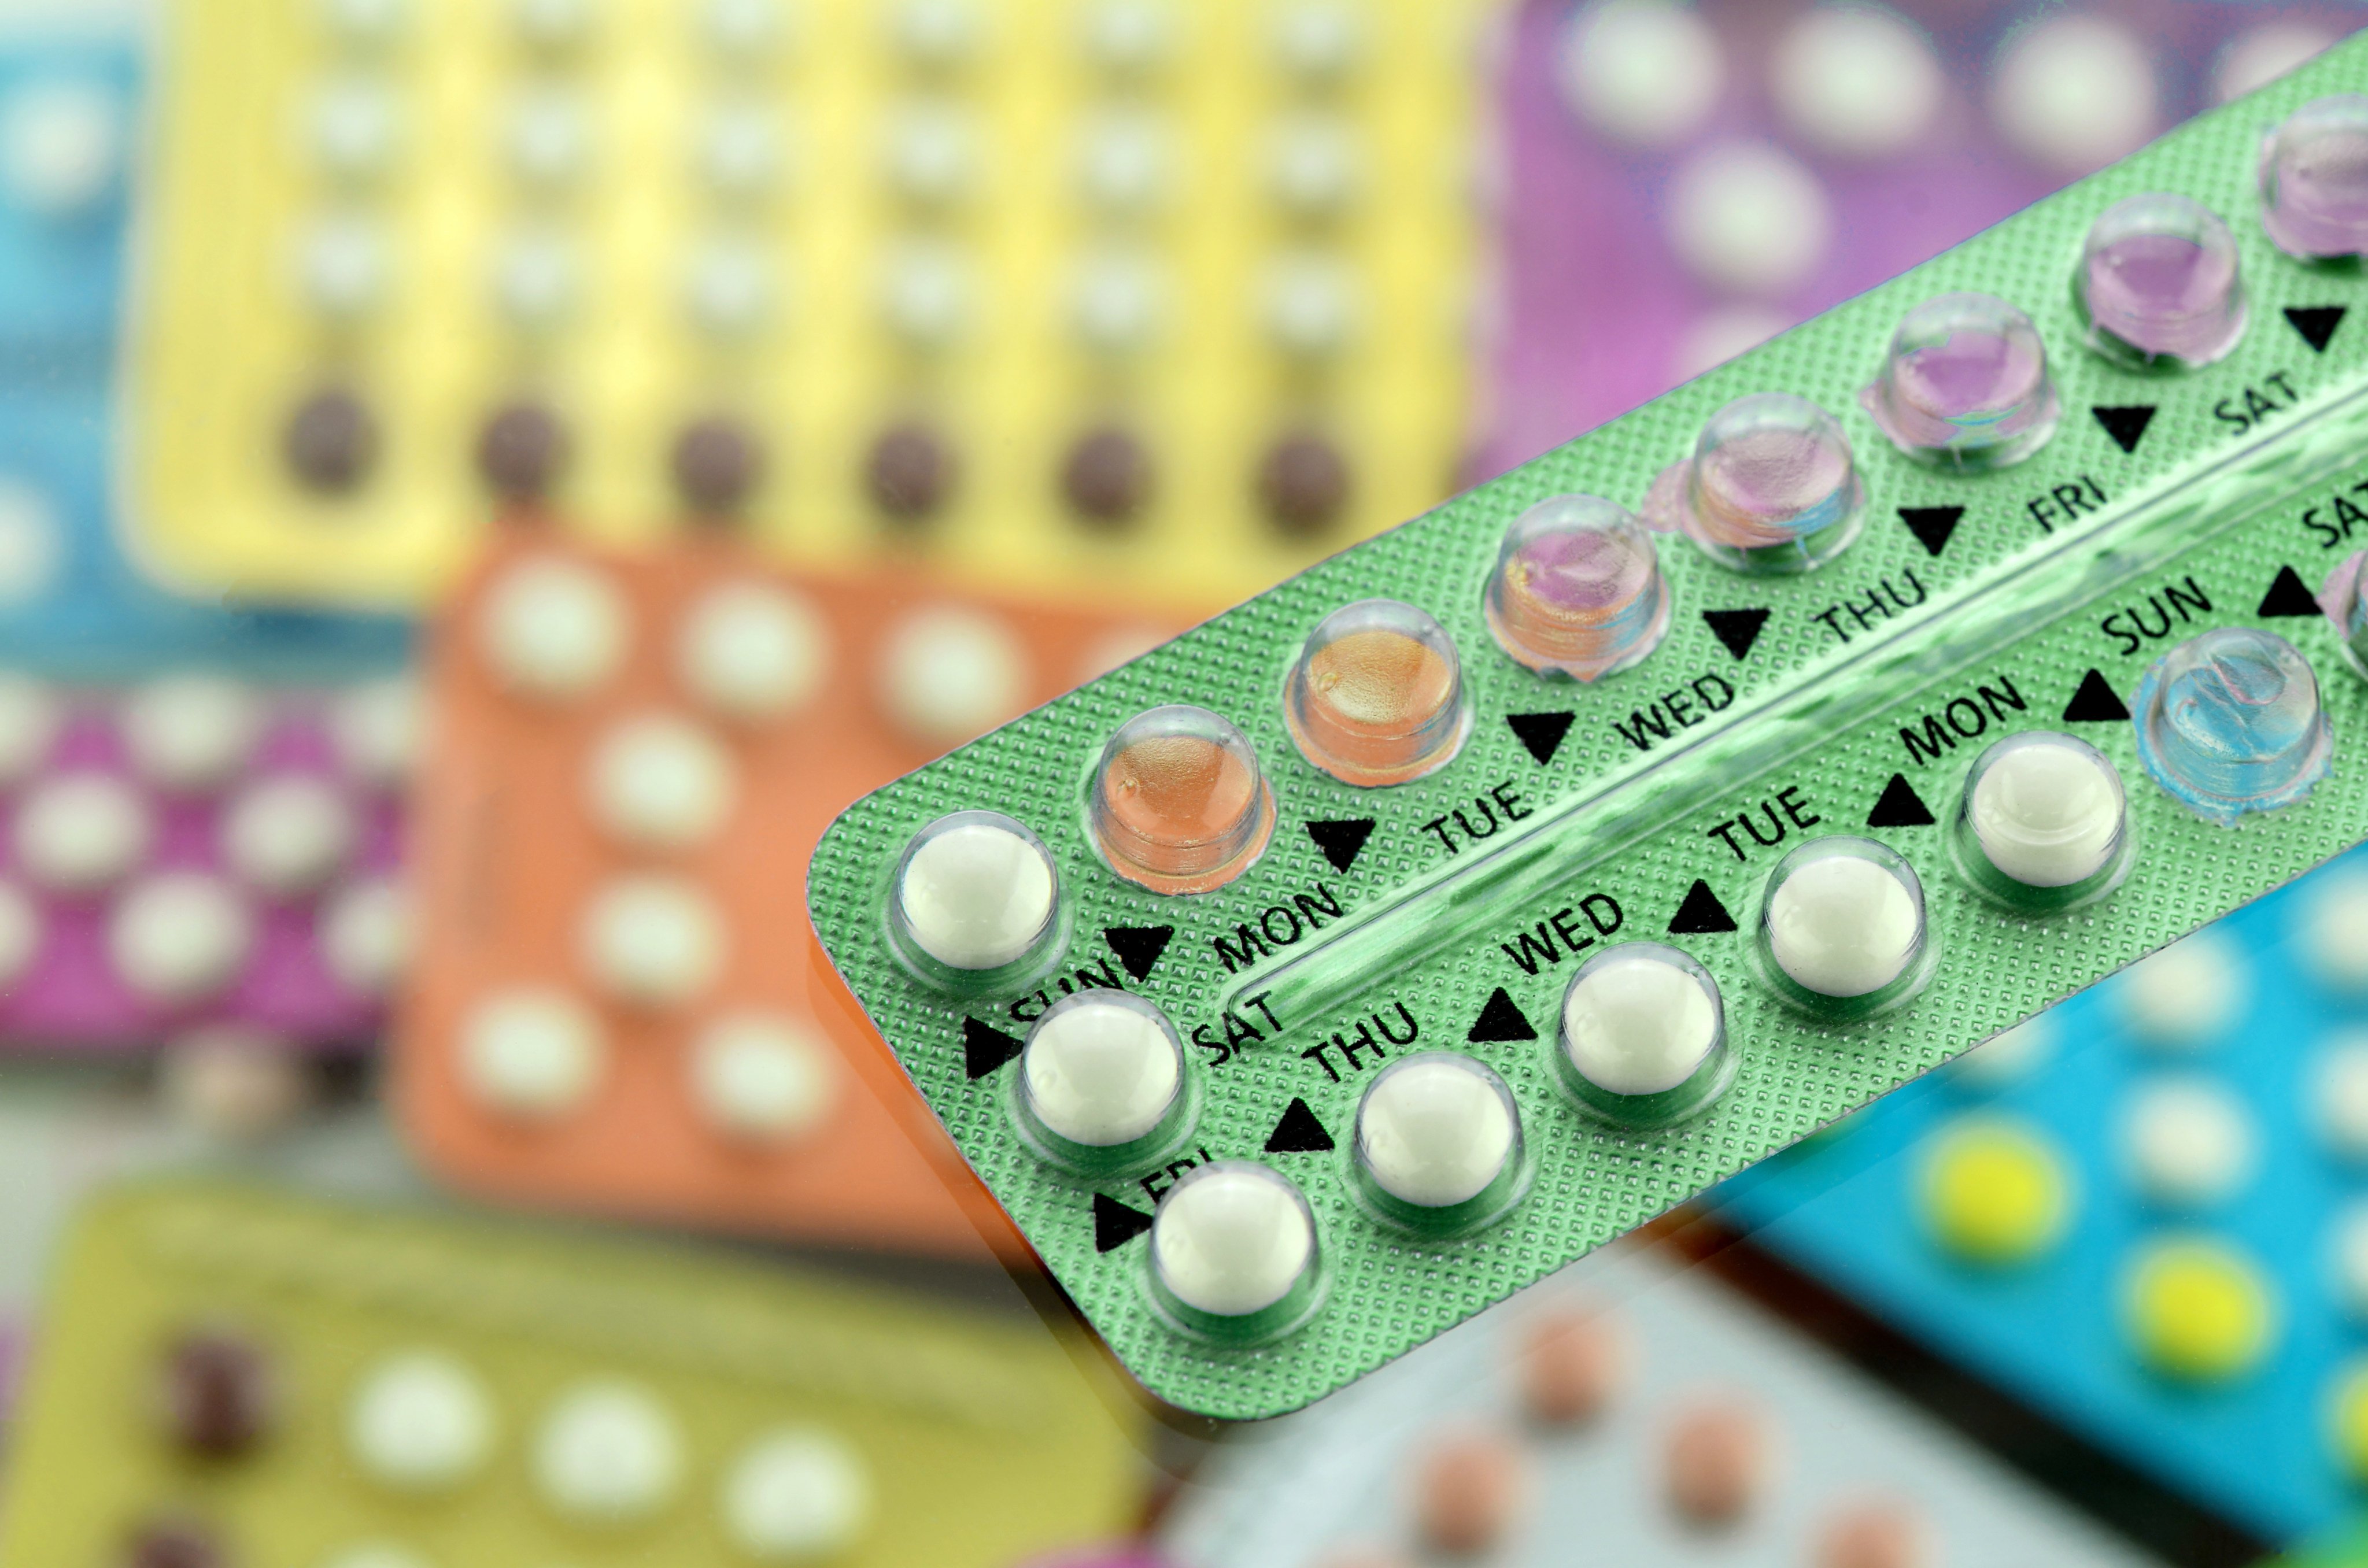 Sixteen men in the UK will begin the world’s first test of a hormone-free male contraceptive pill, so pregnancy prevention is not just a ‘woman’s responsibility’. Photo: Shutterstock